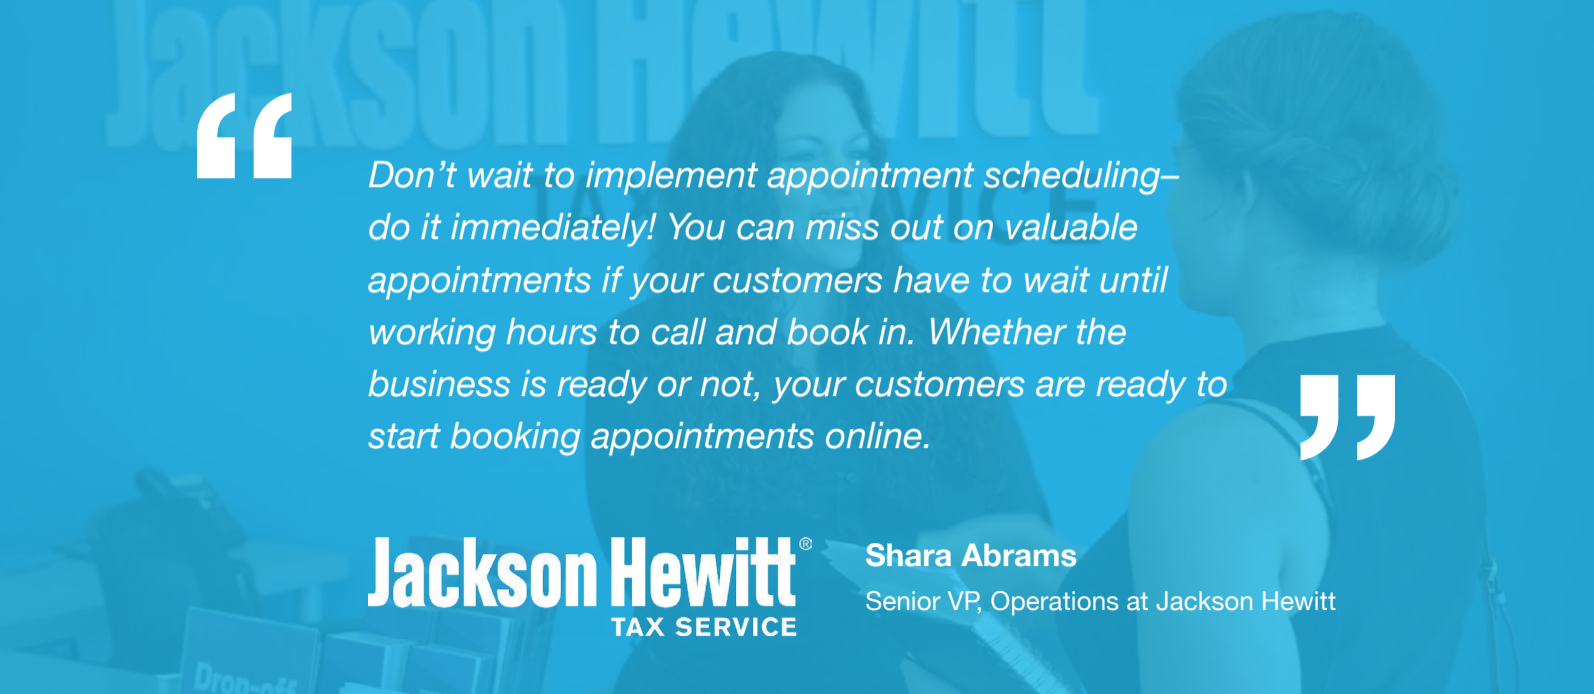 Jackson Hewitt - Appointment Scheduling Quote